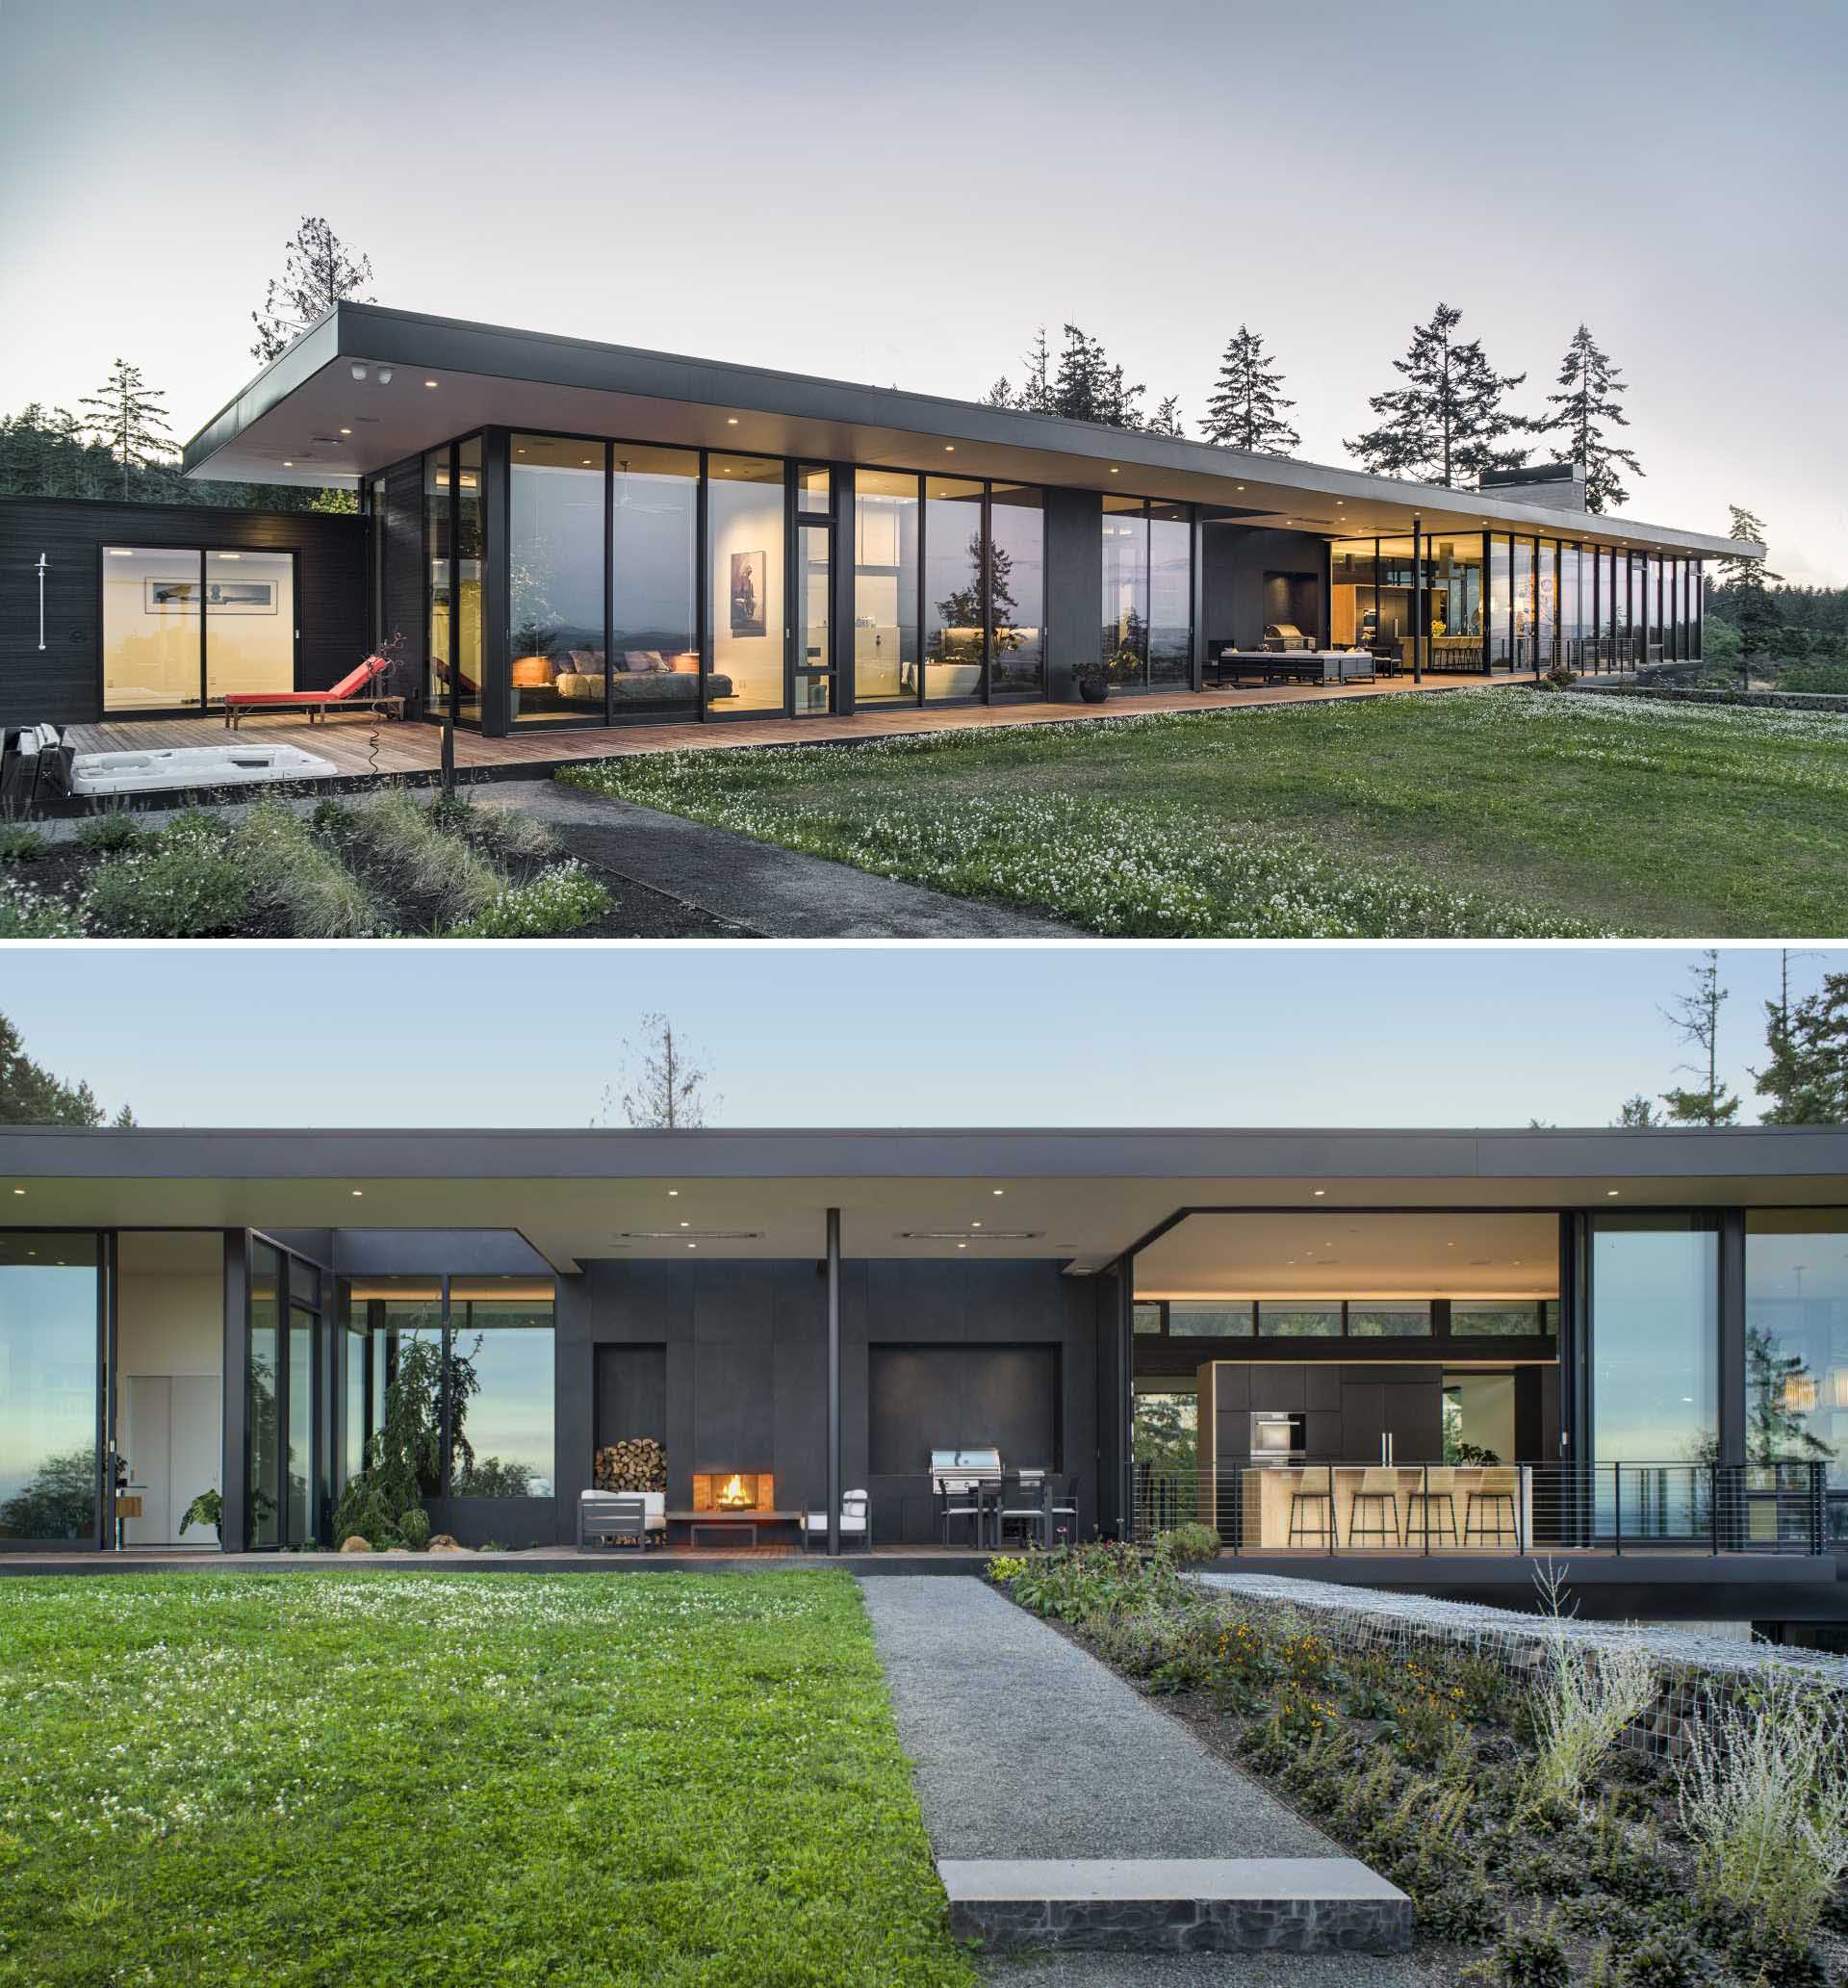 This modern home features floor-to-ceiling windows, and sliding doors are used in every east-facing room, all with the intent to blur the line between inside and out.